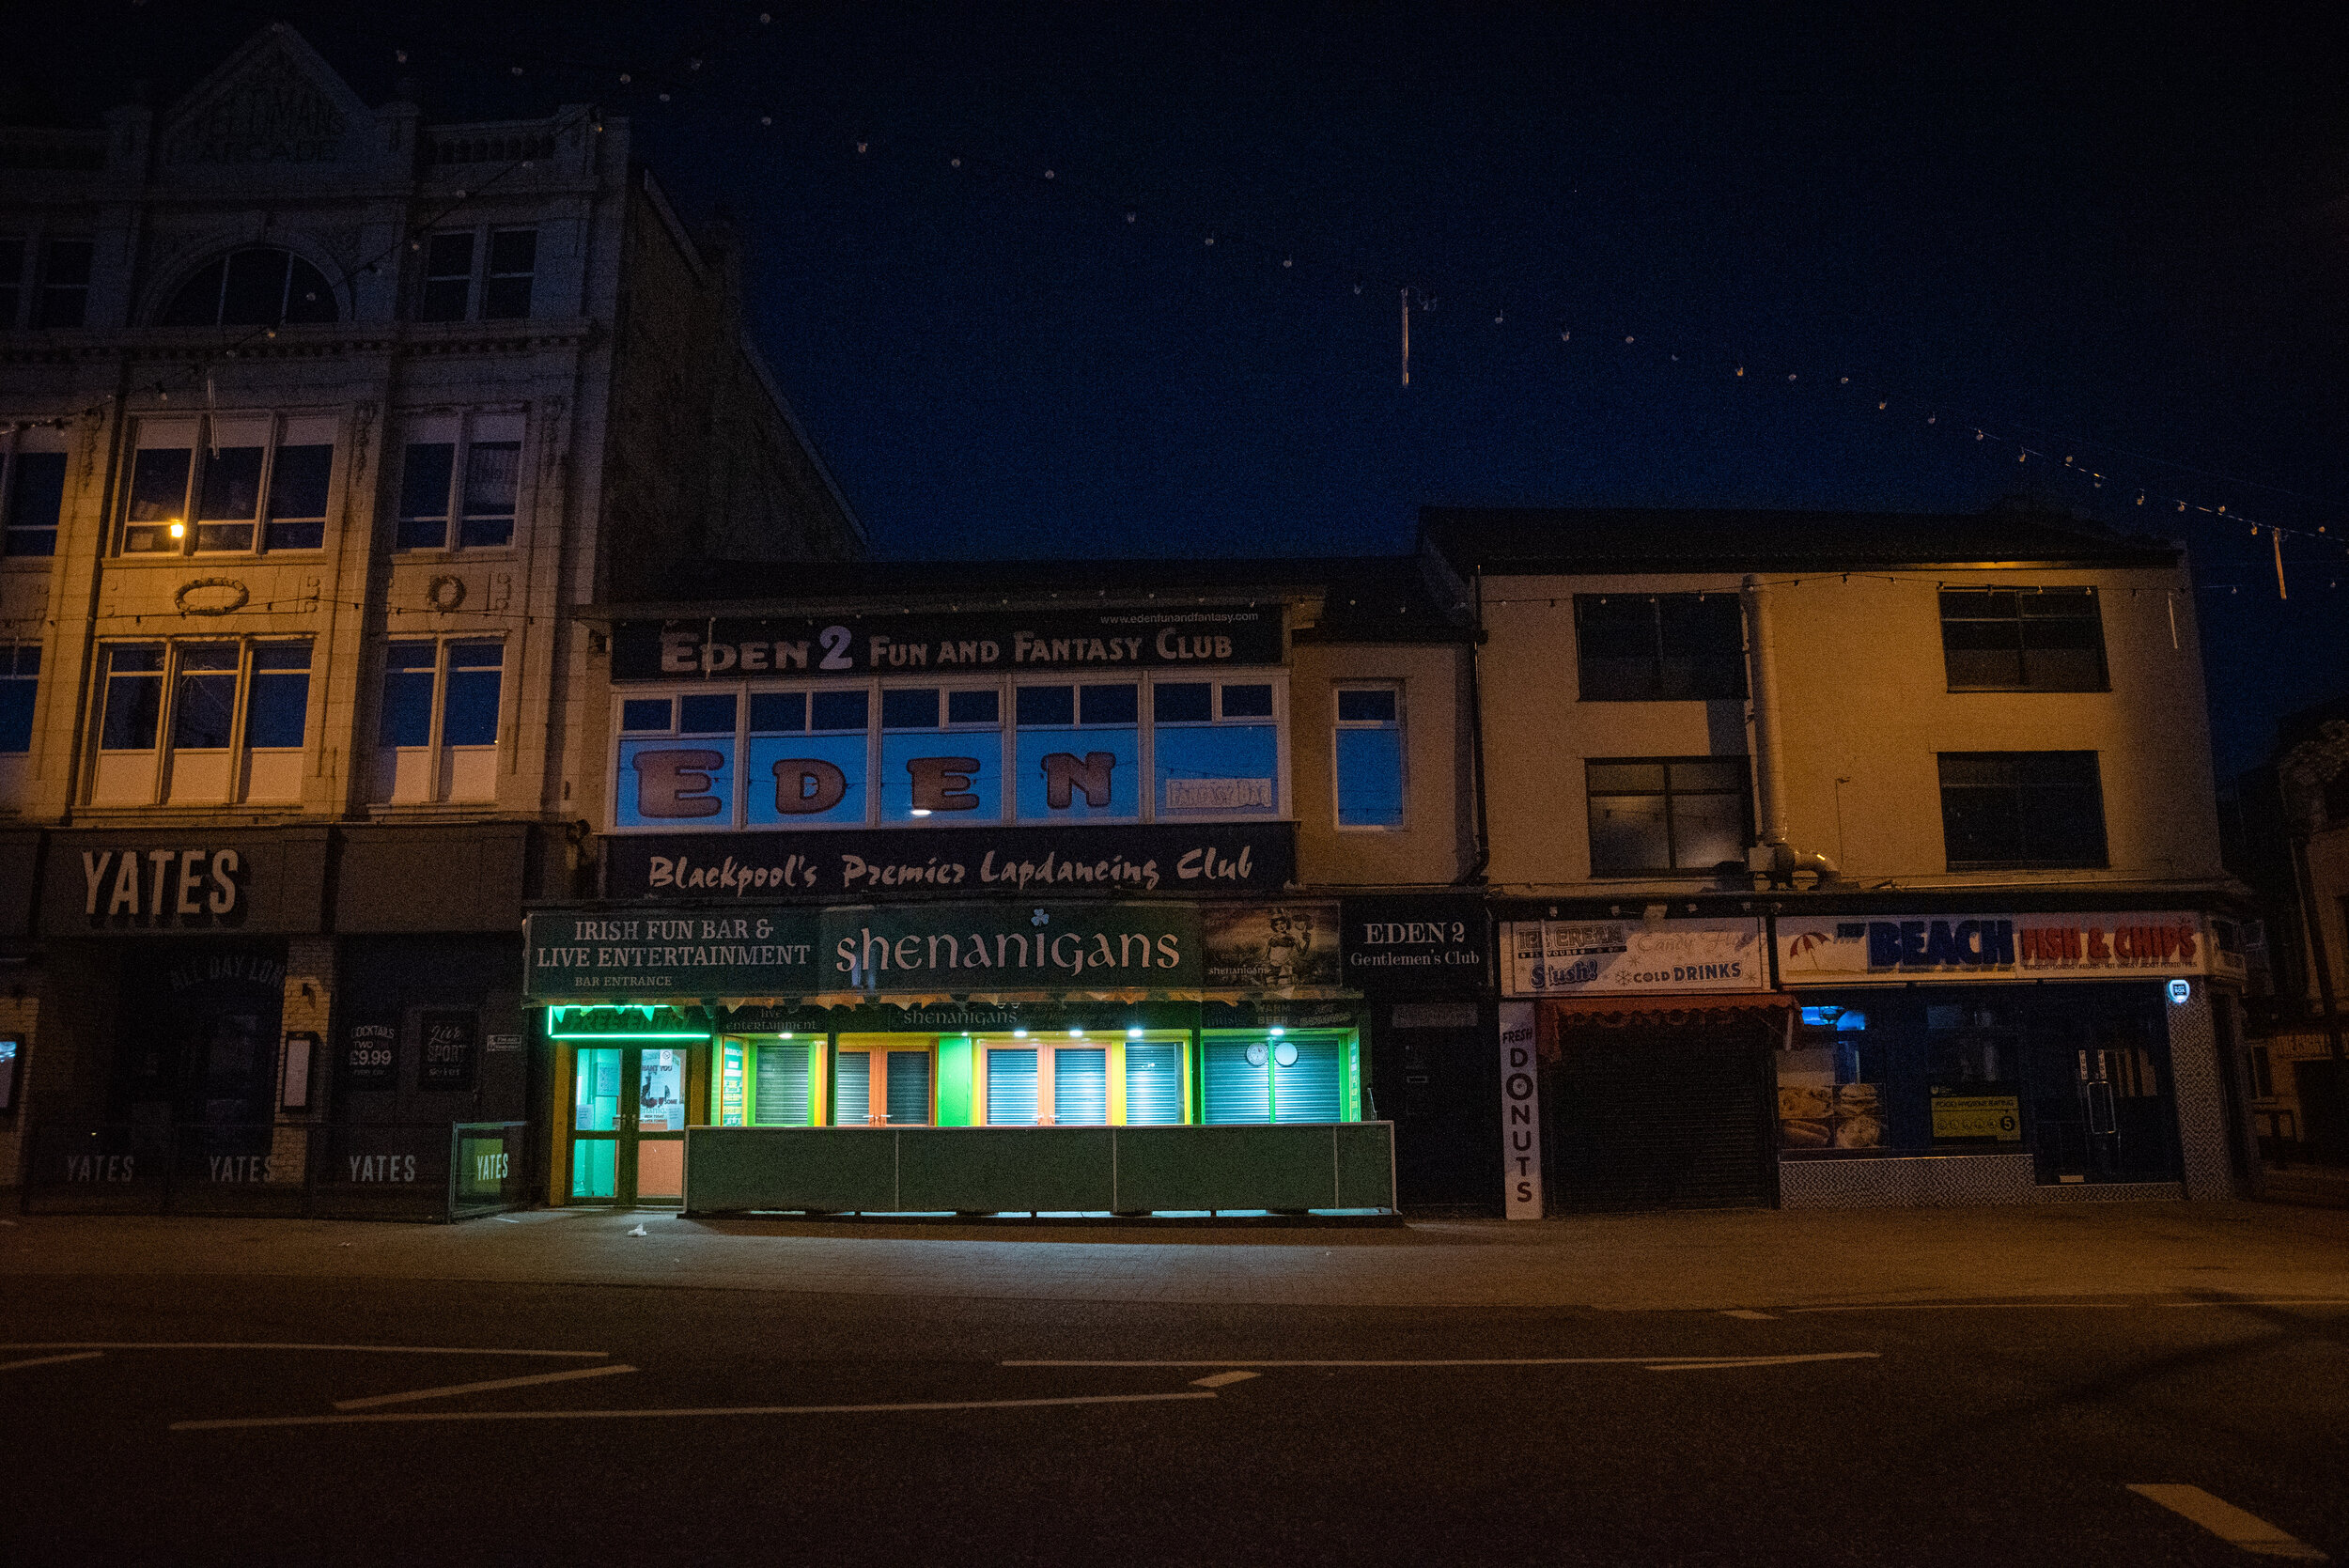 Claire Griffiths April Lockdown 2020 - Pubs in Lockdown and Night Time Blackpool (10).jpg